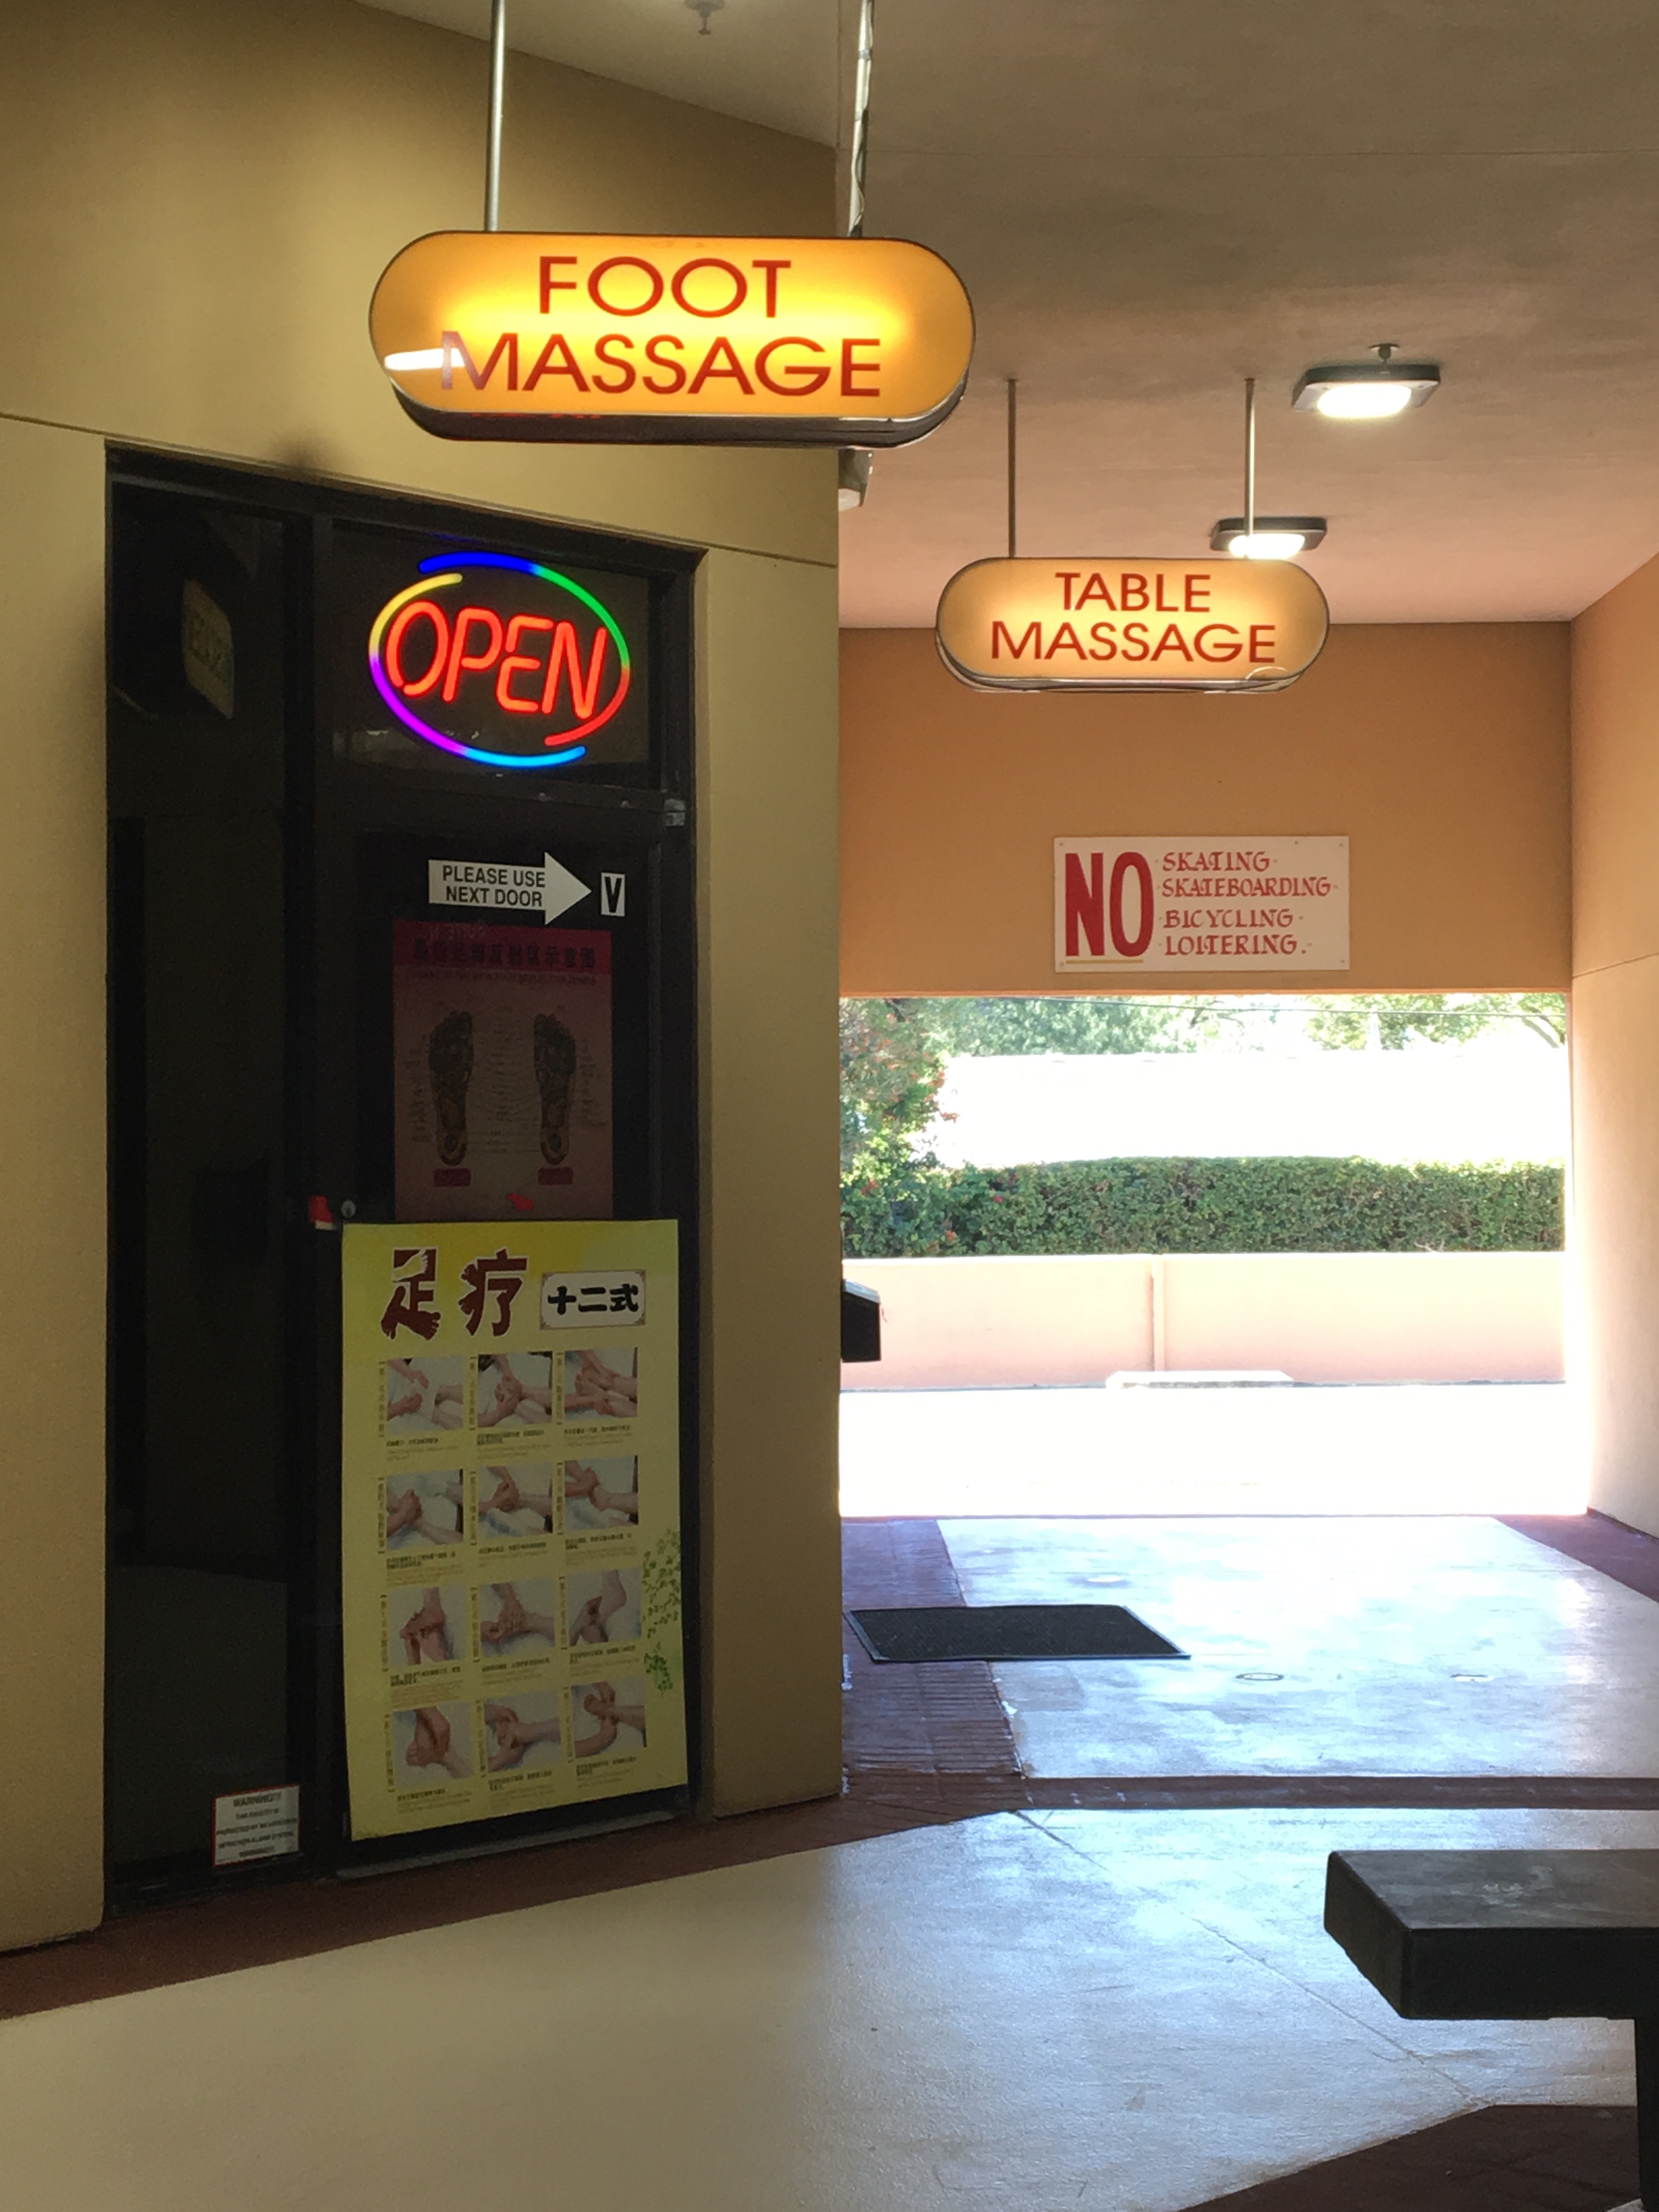 cynthia ferrell recommends chinese massage in houston pic